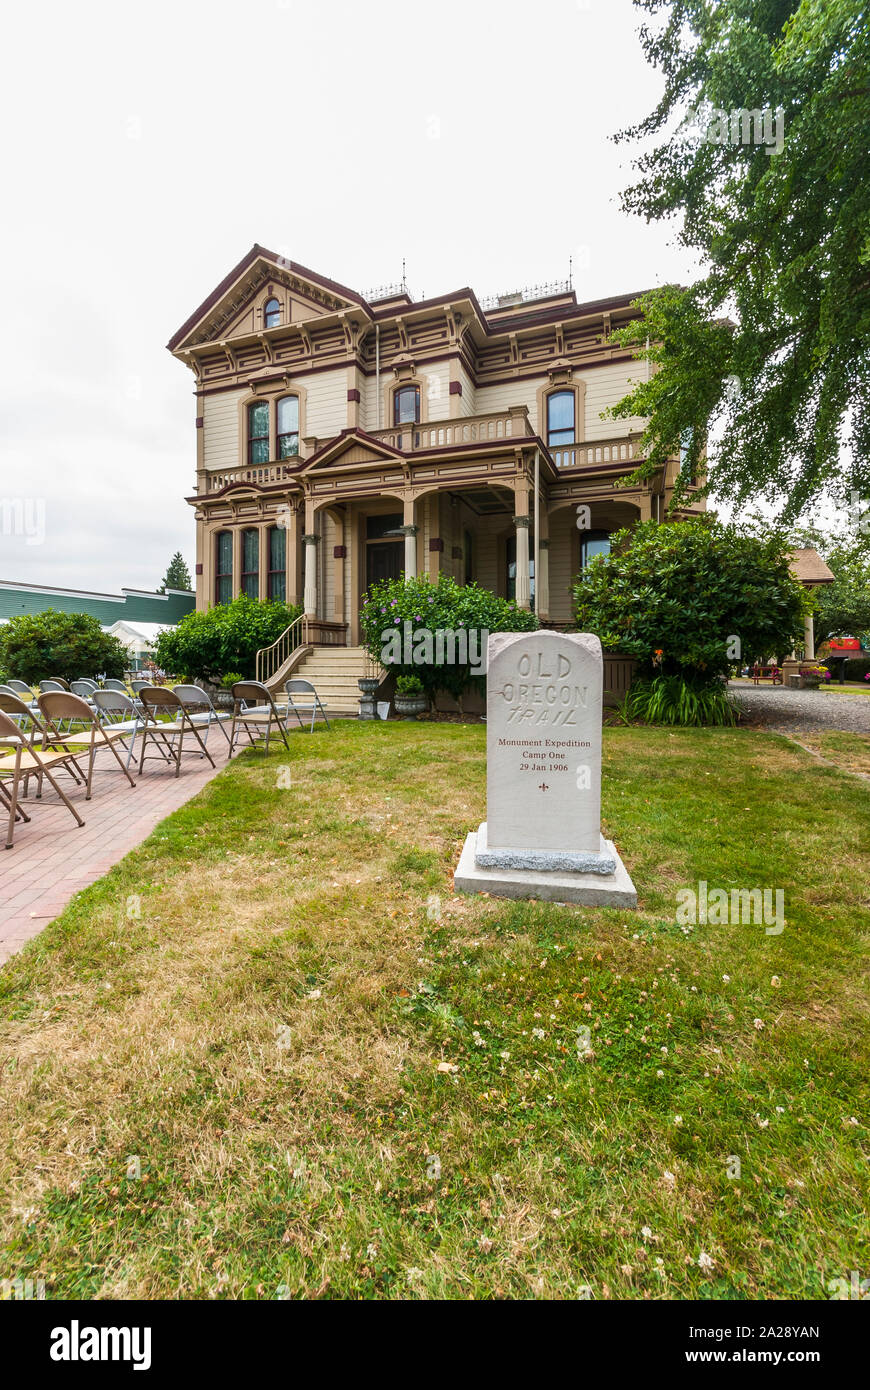 Meeker Mansion (built in 1886 in the Victorian style) and landscaping in Puyallup, Washington.  This view shows the Old Oregon Trail marker. Stock Photo